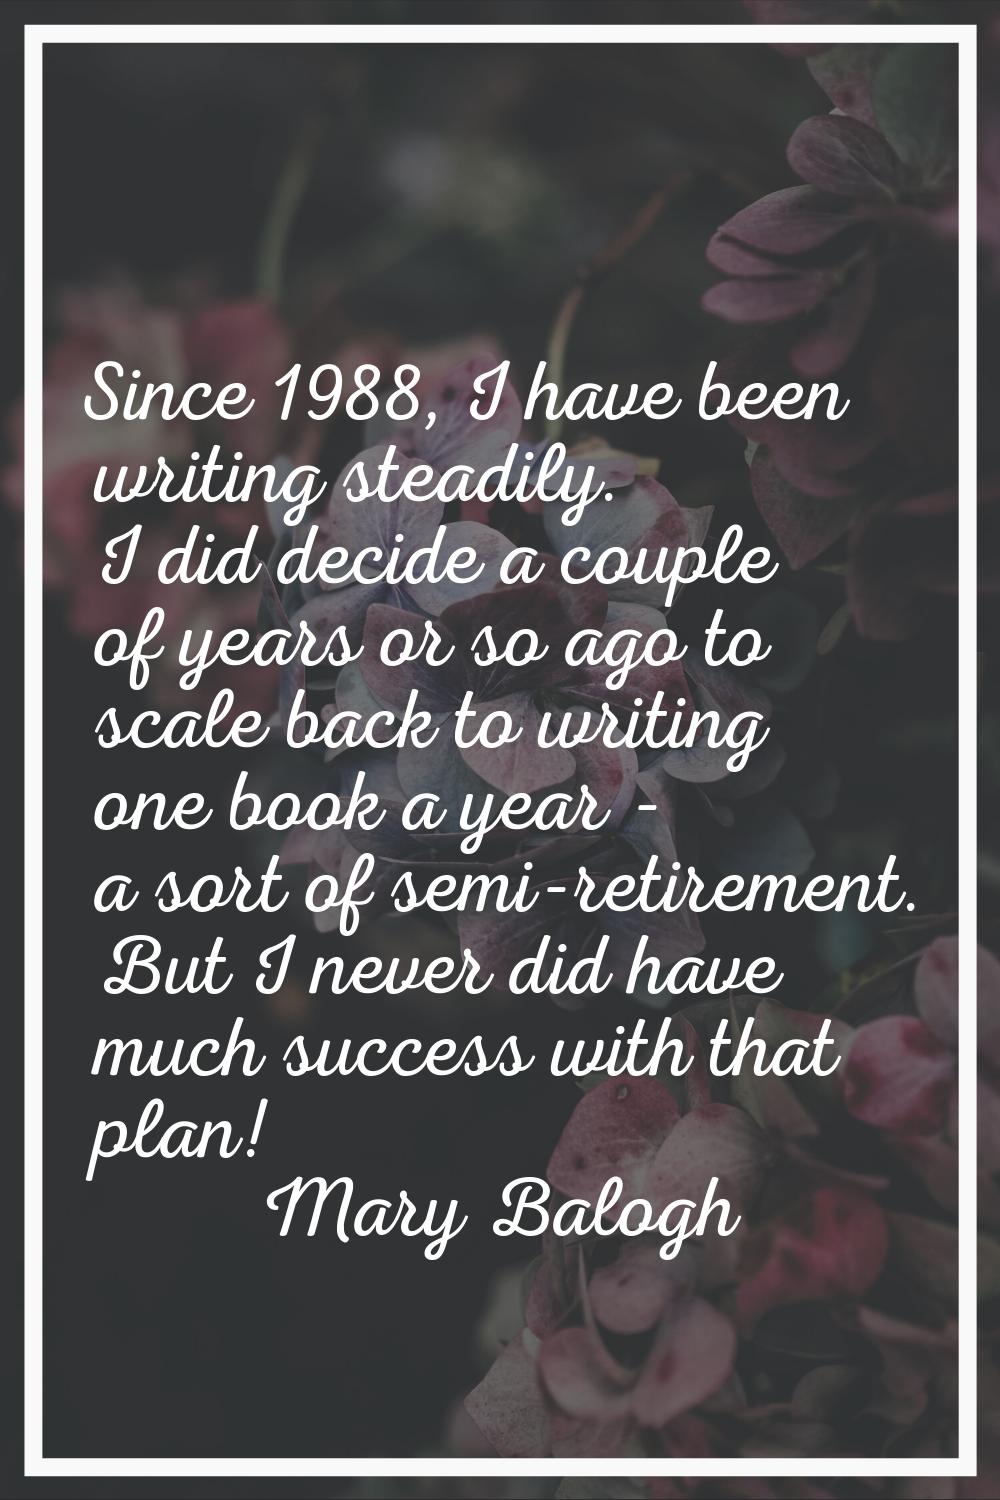 Since 1988, I have been writing steadily. I did decide a couple of years or so ago to scale back to